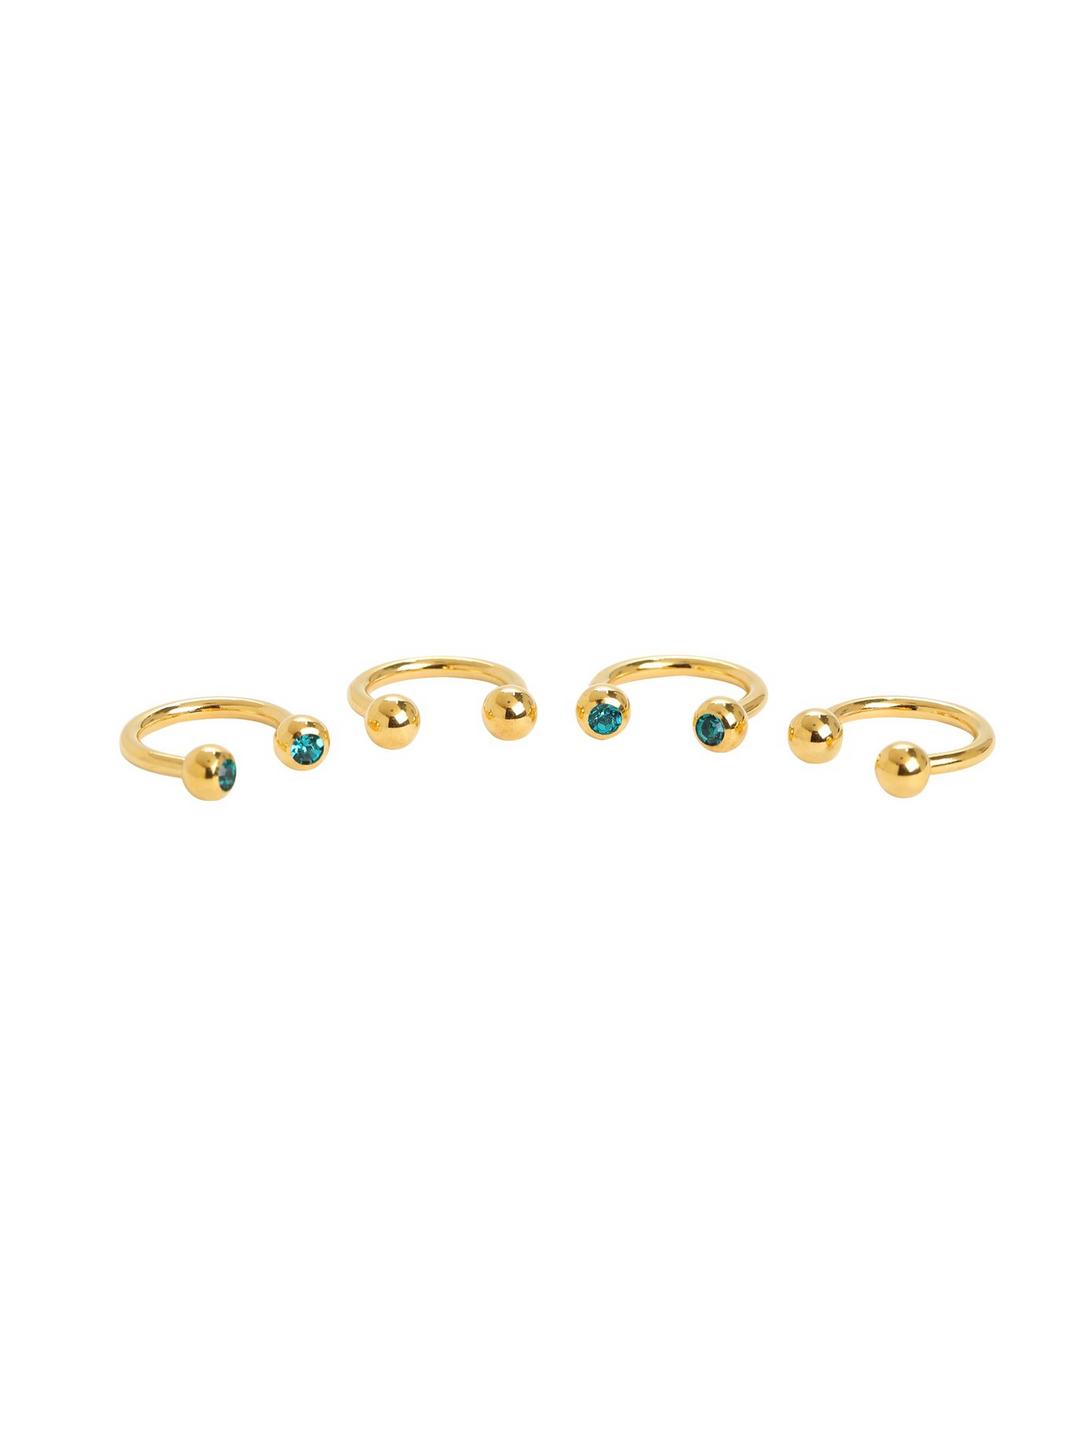 Steel Gold Turquoise CZ Circular Barbell 4 Pack, MULTI, hi-res